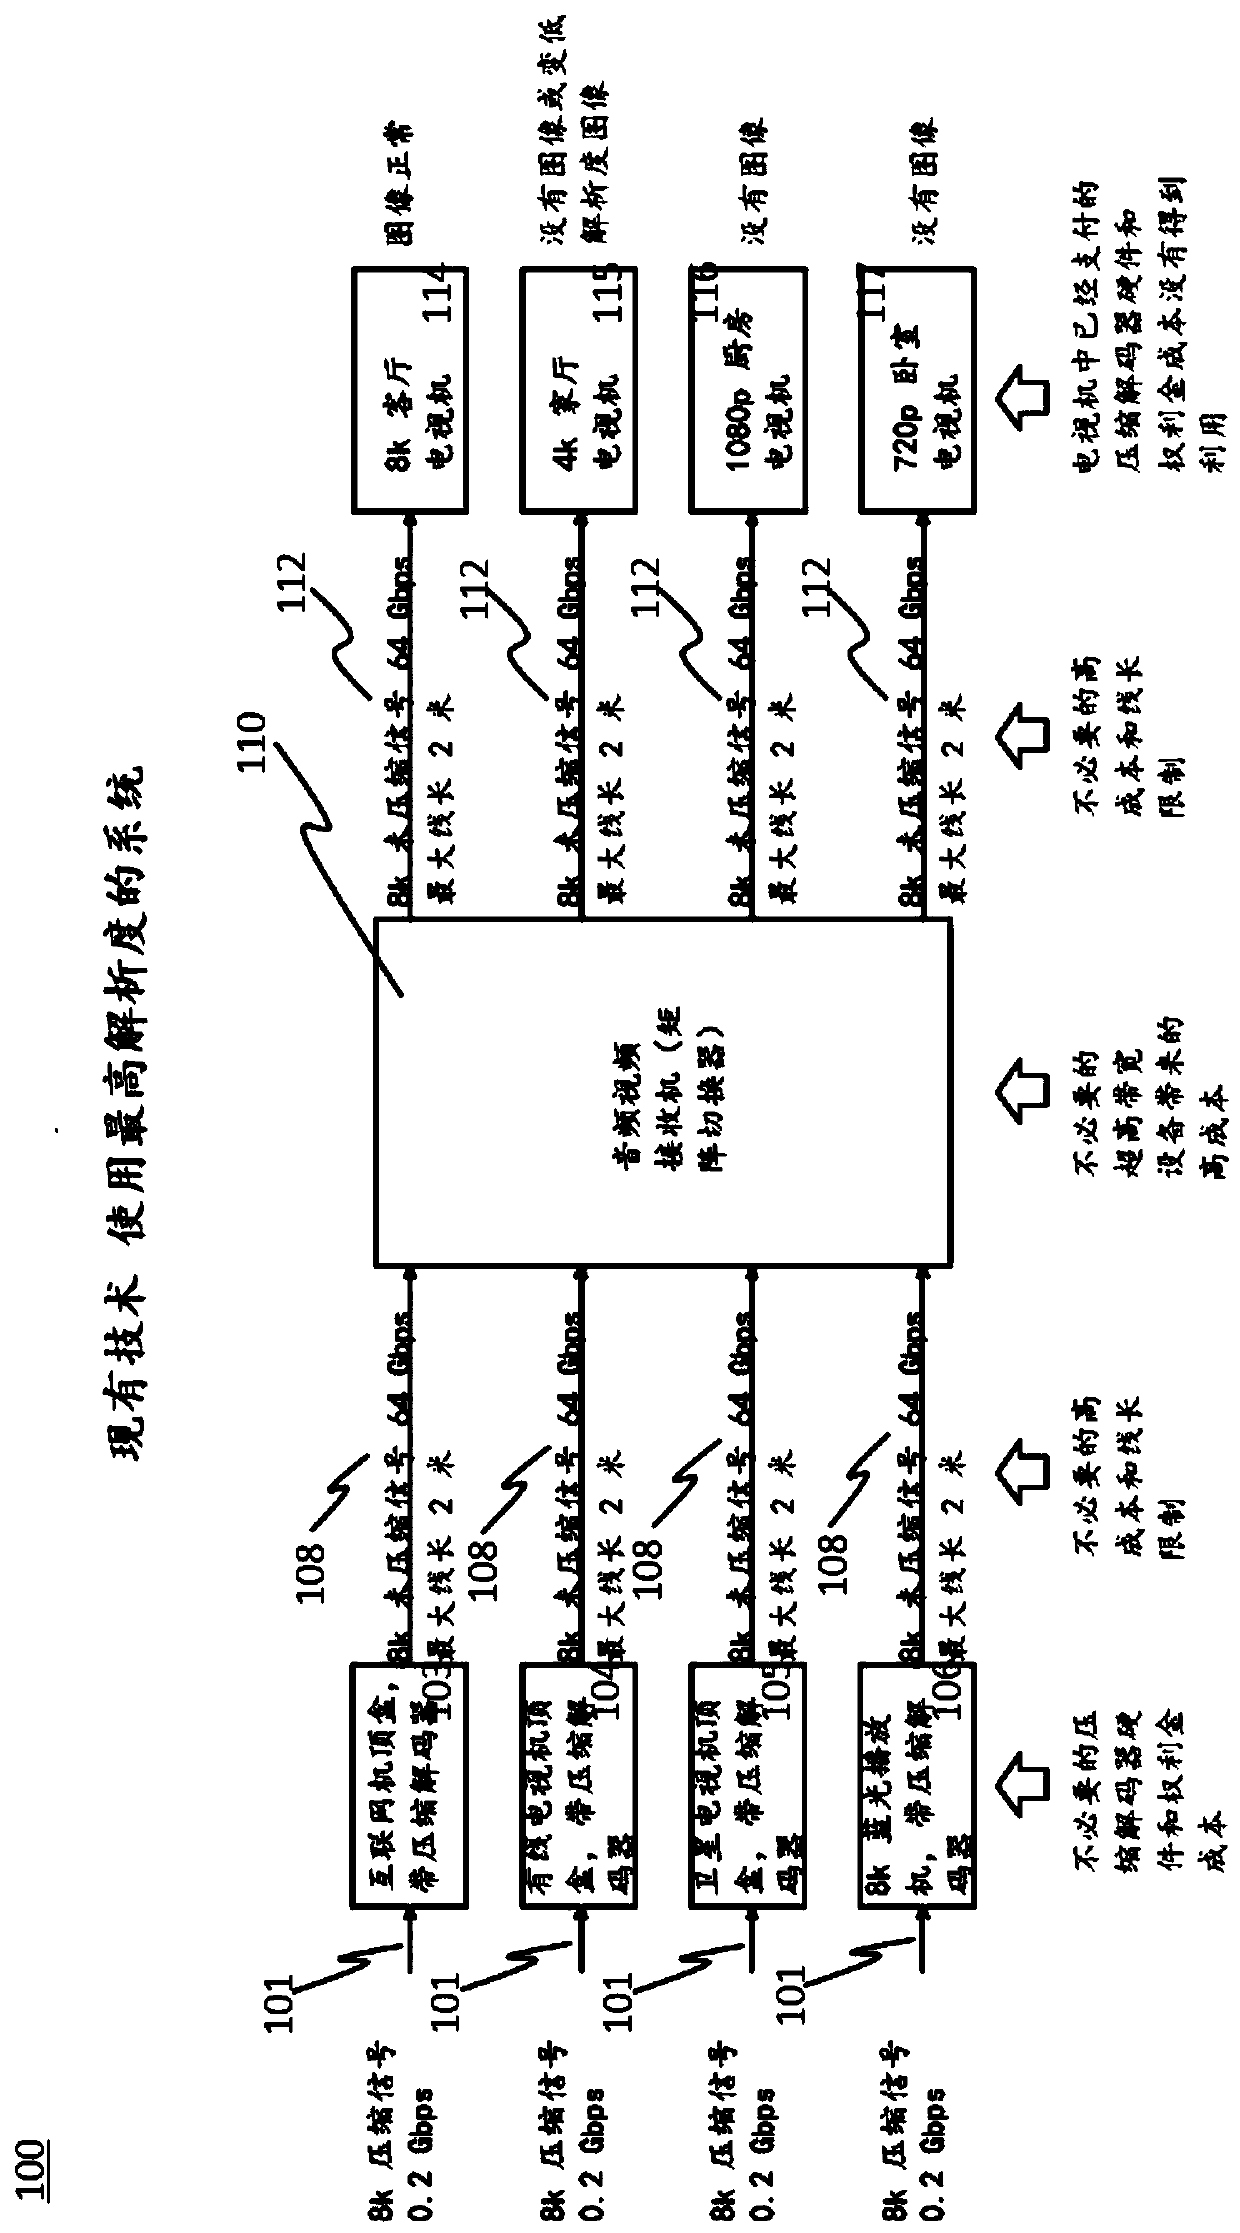 Xdi systems, devices, connectors and methods